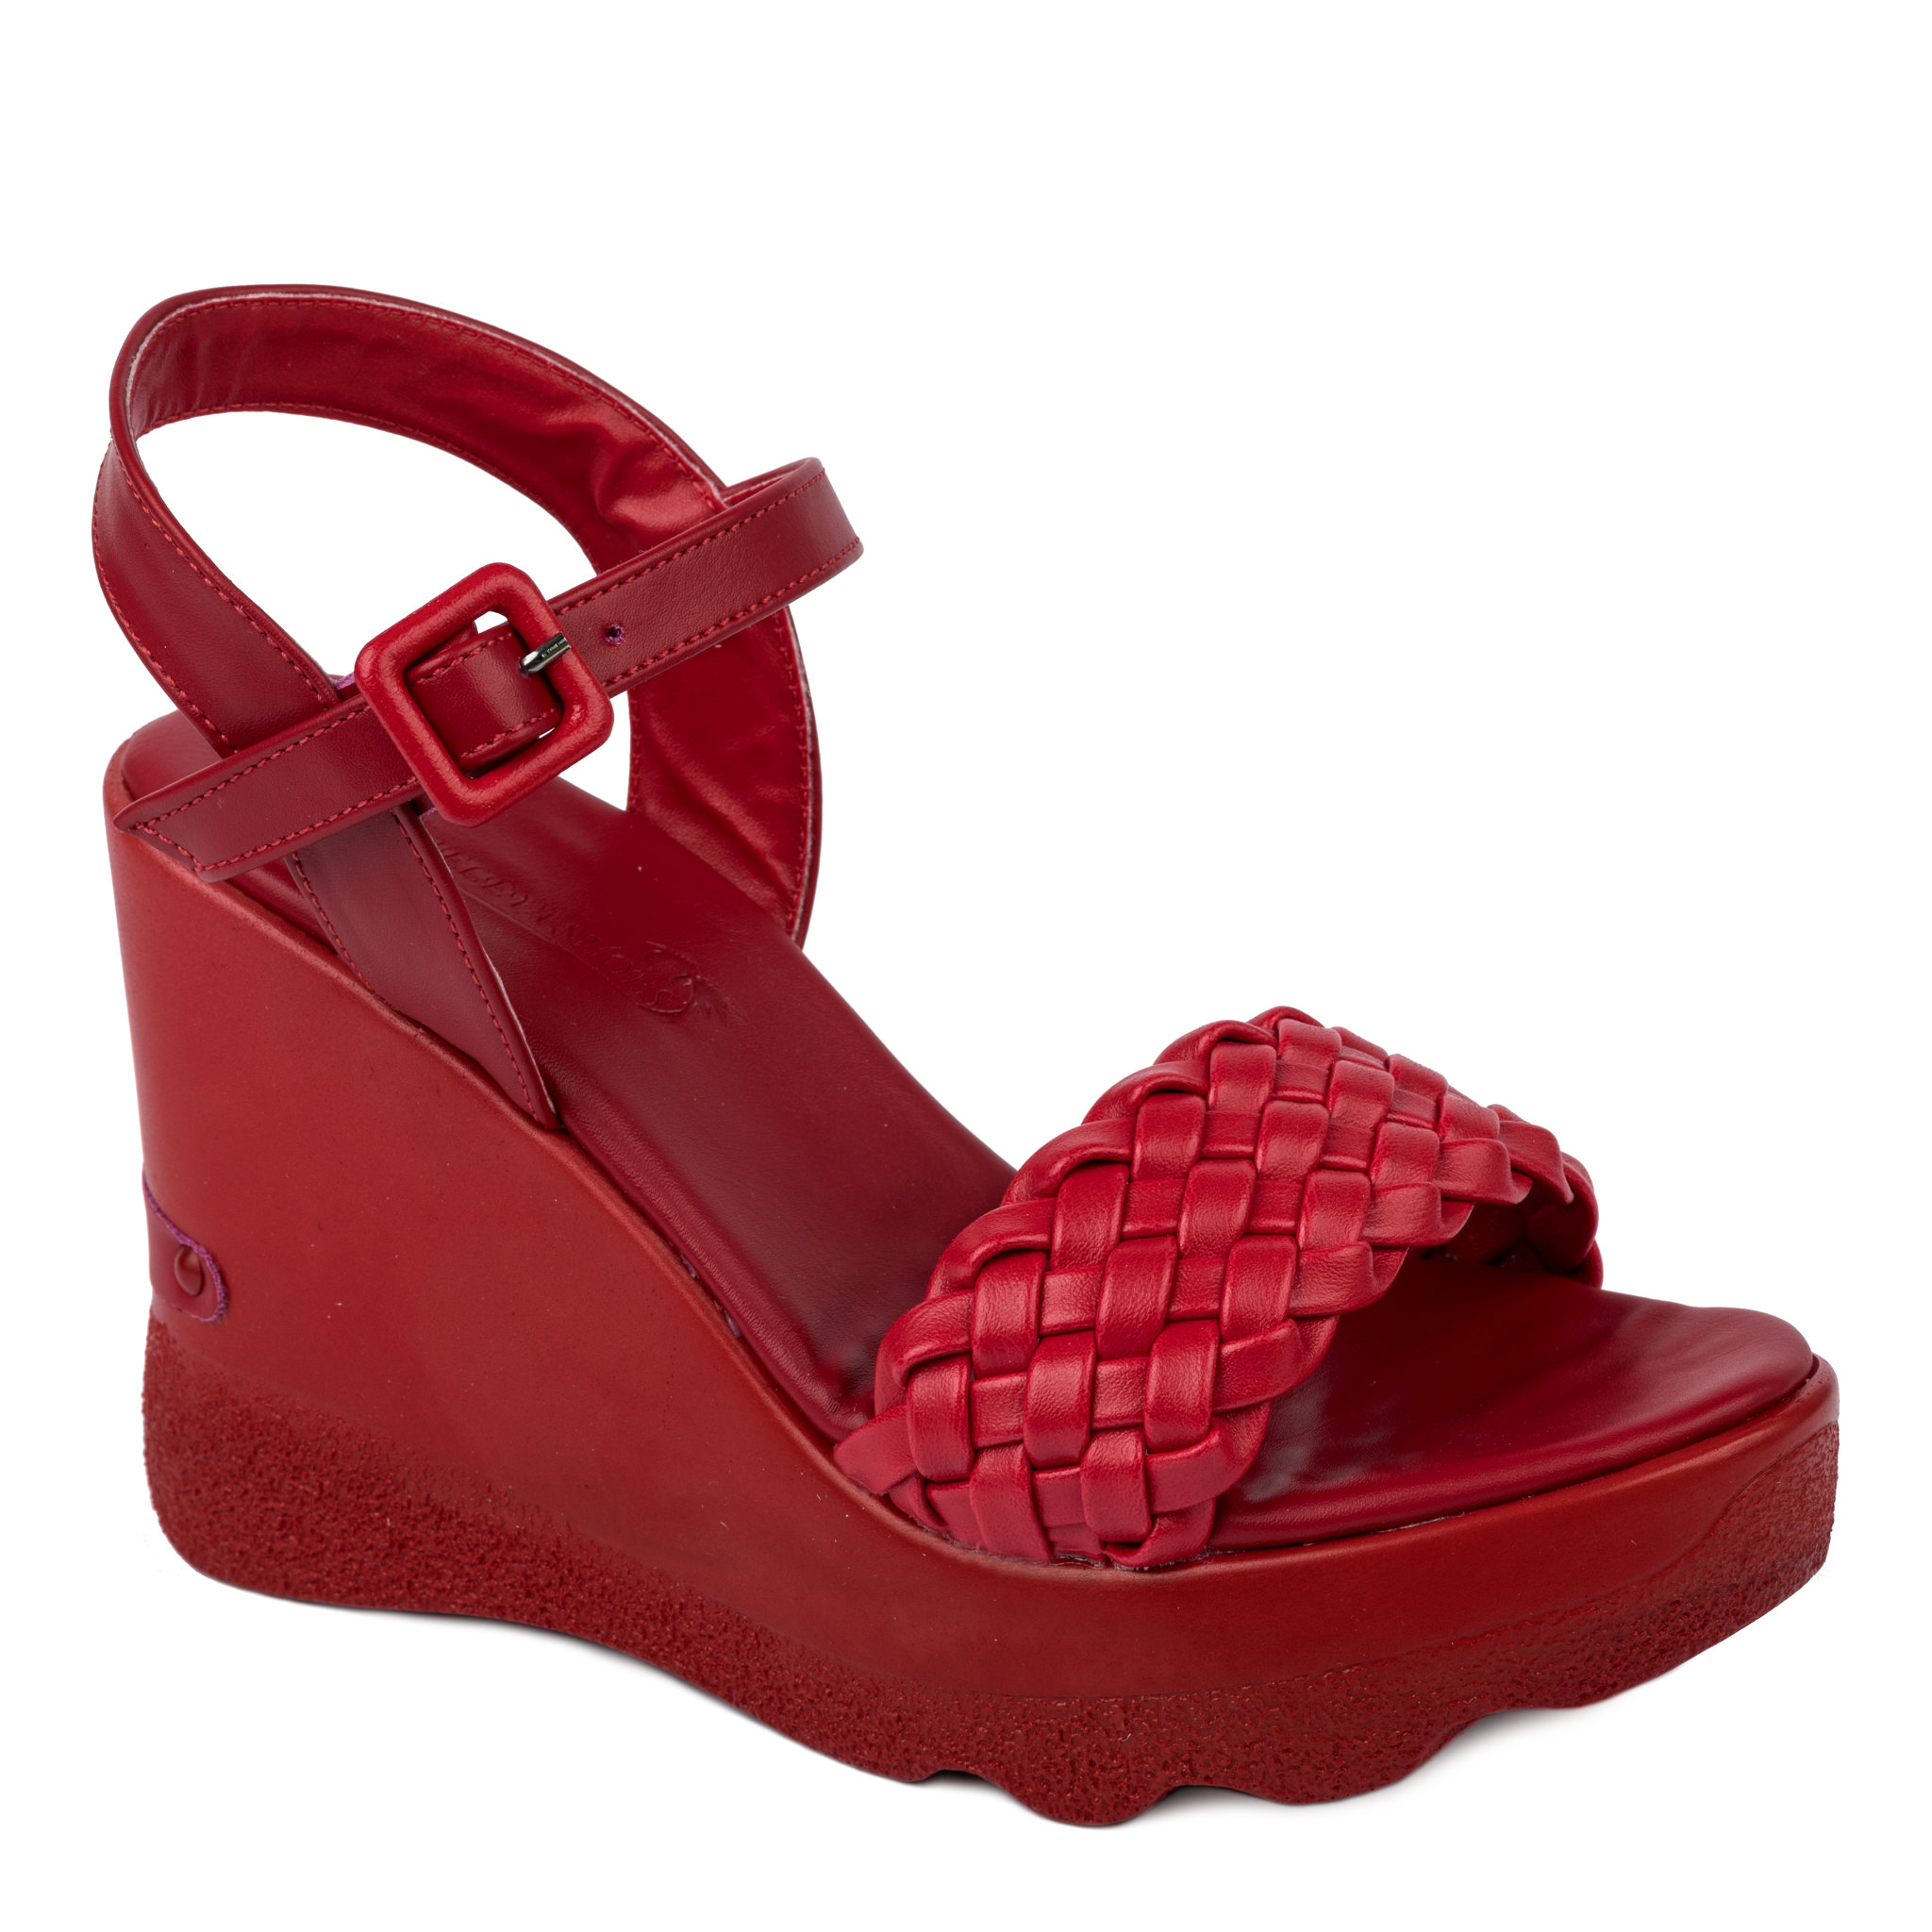 KNITTED WEDGE SANDALS - RED